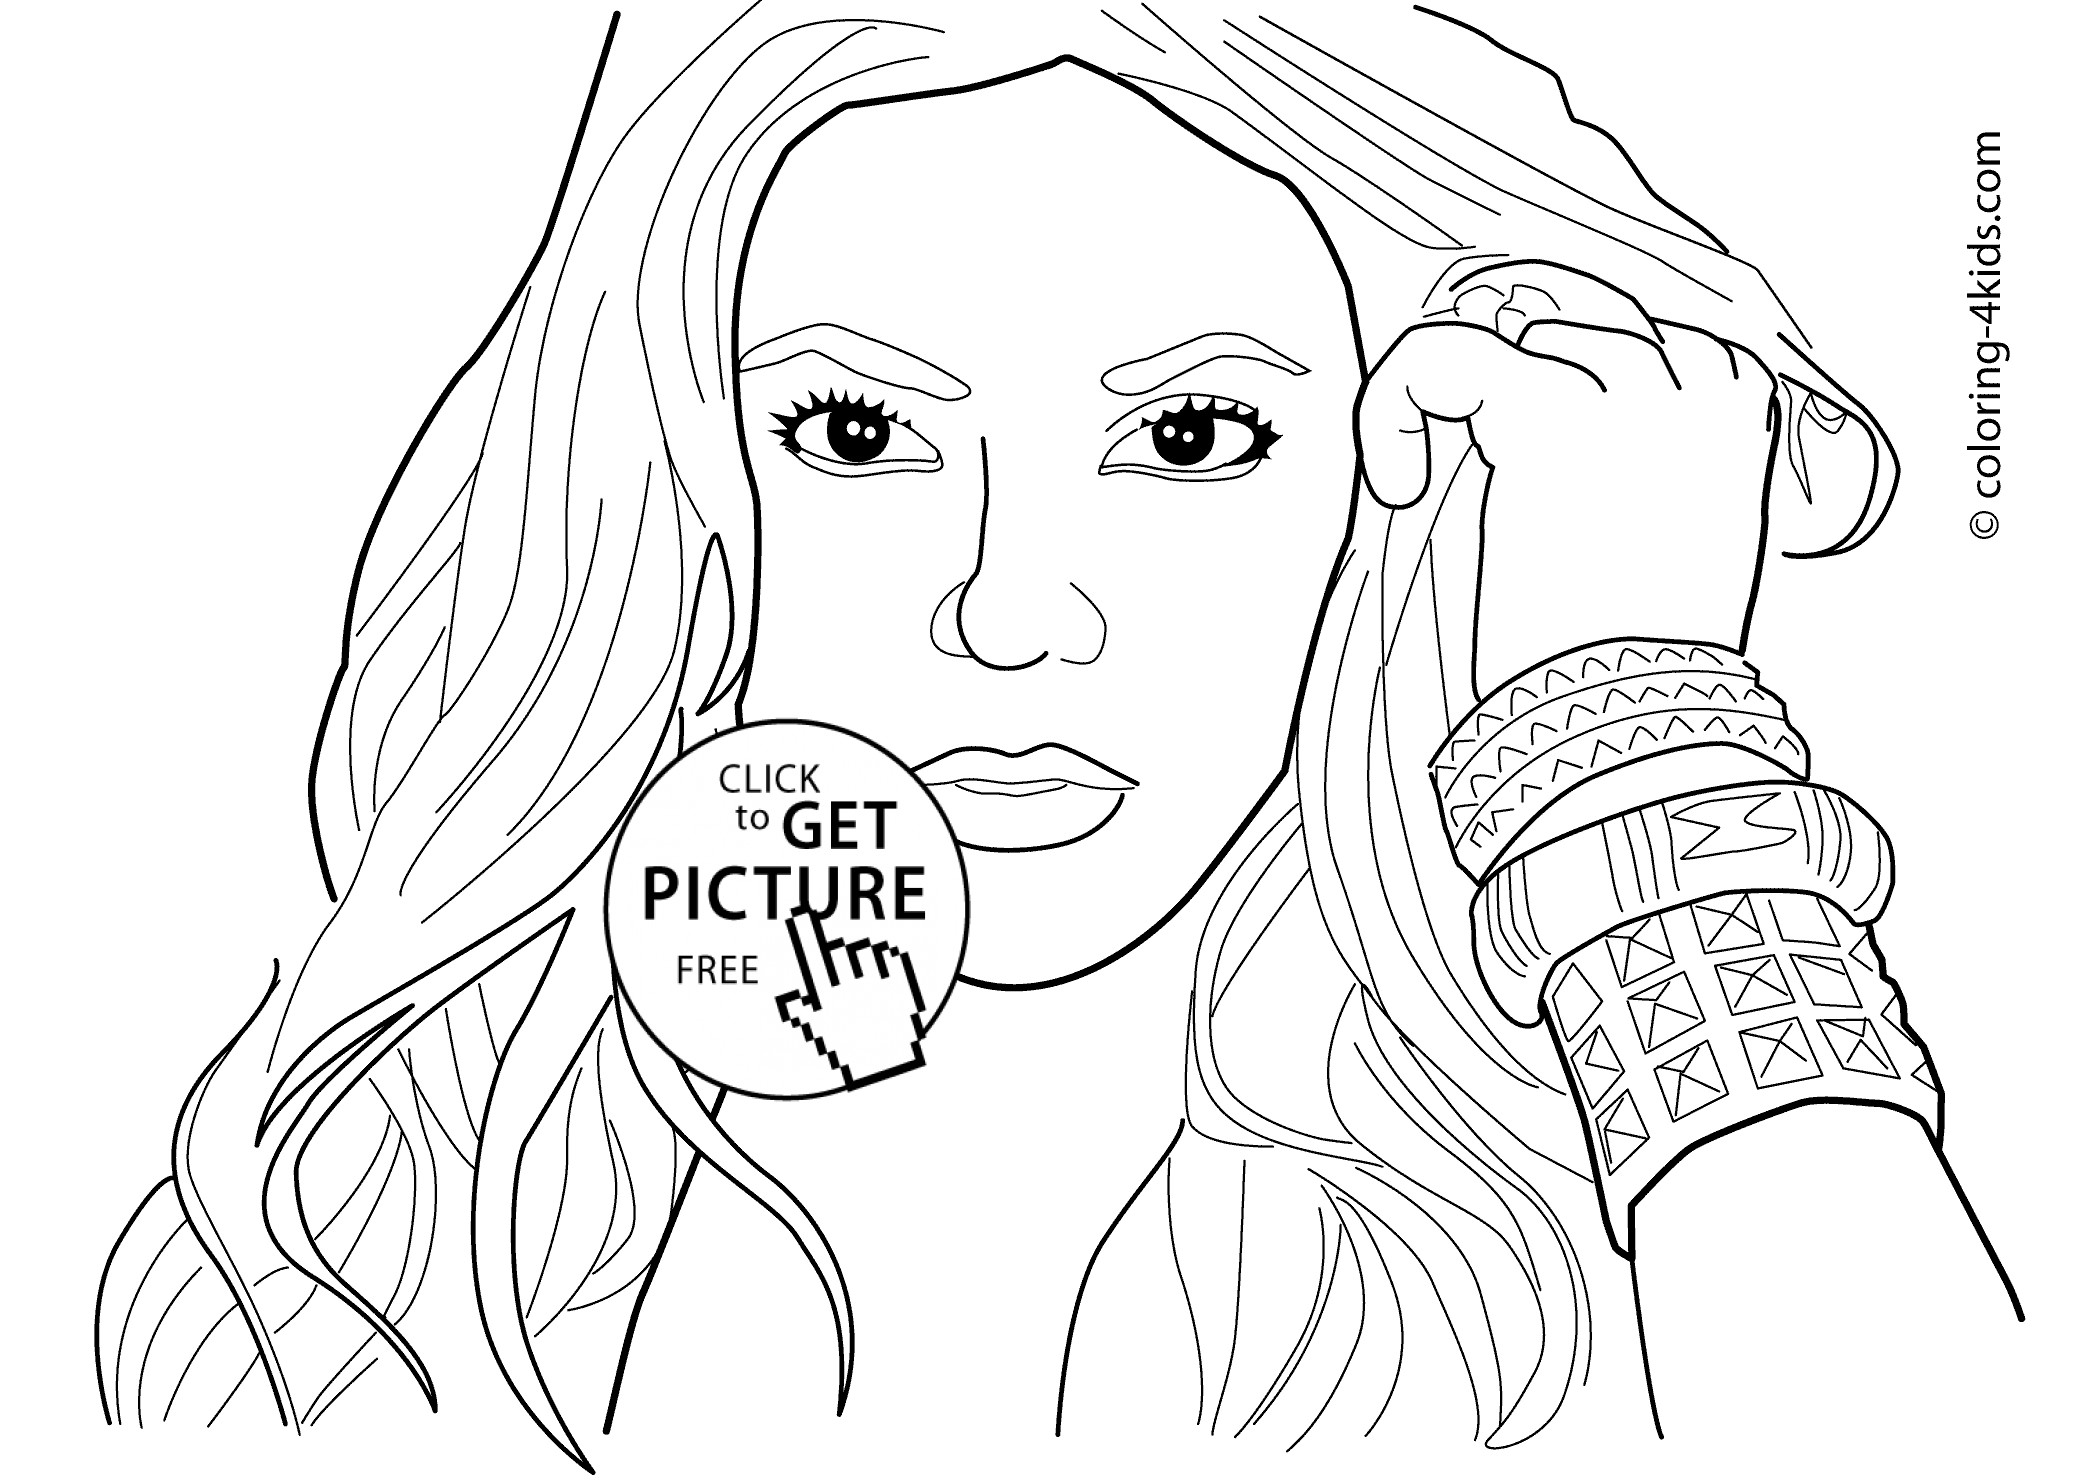 Coloring Pages Of People
 Shakira coloring pages for kids printable free coloring books